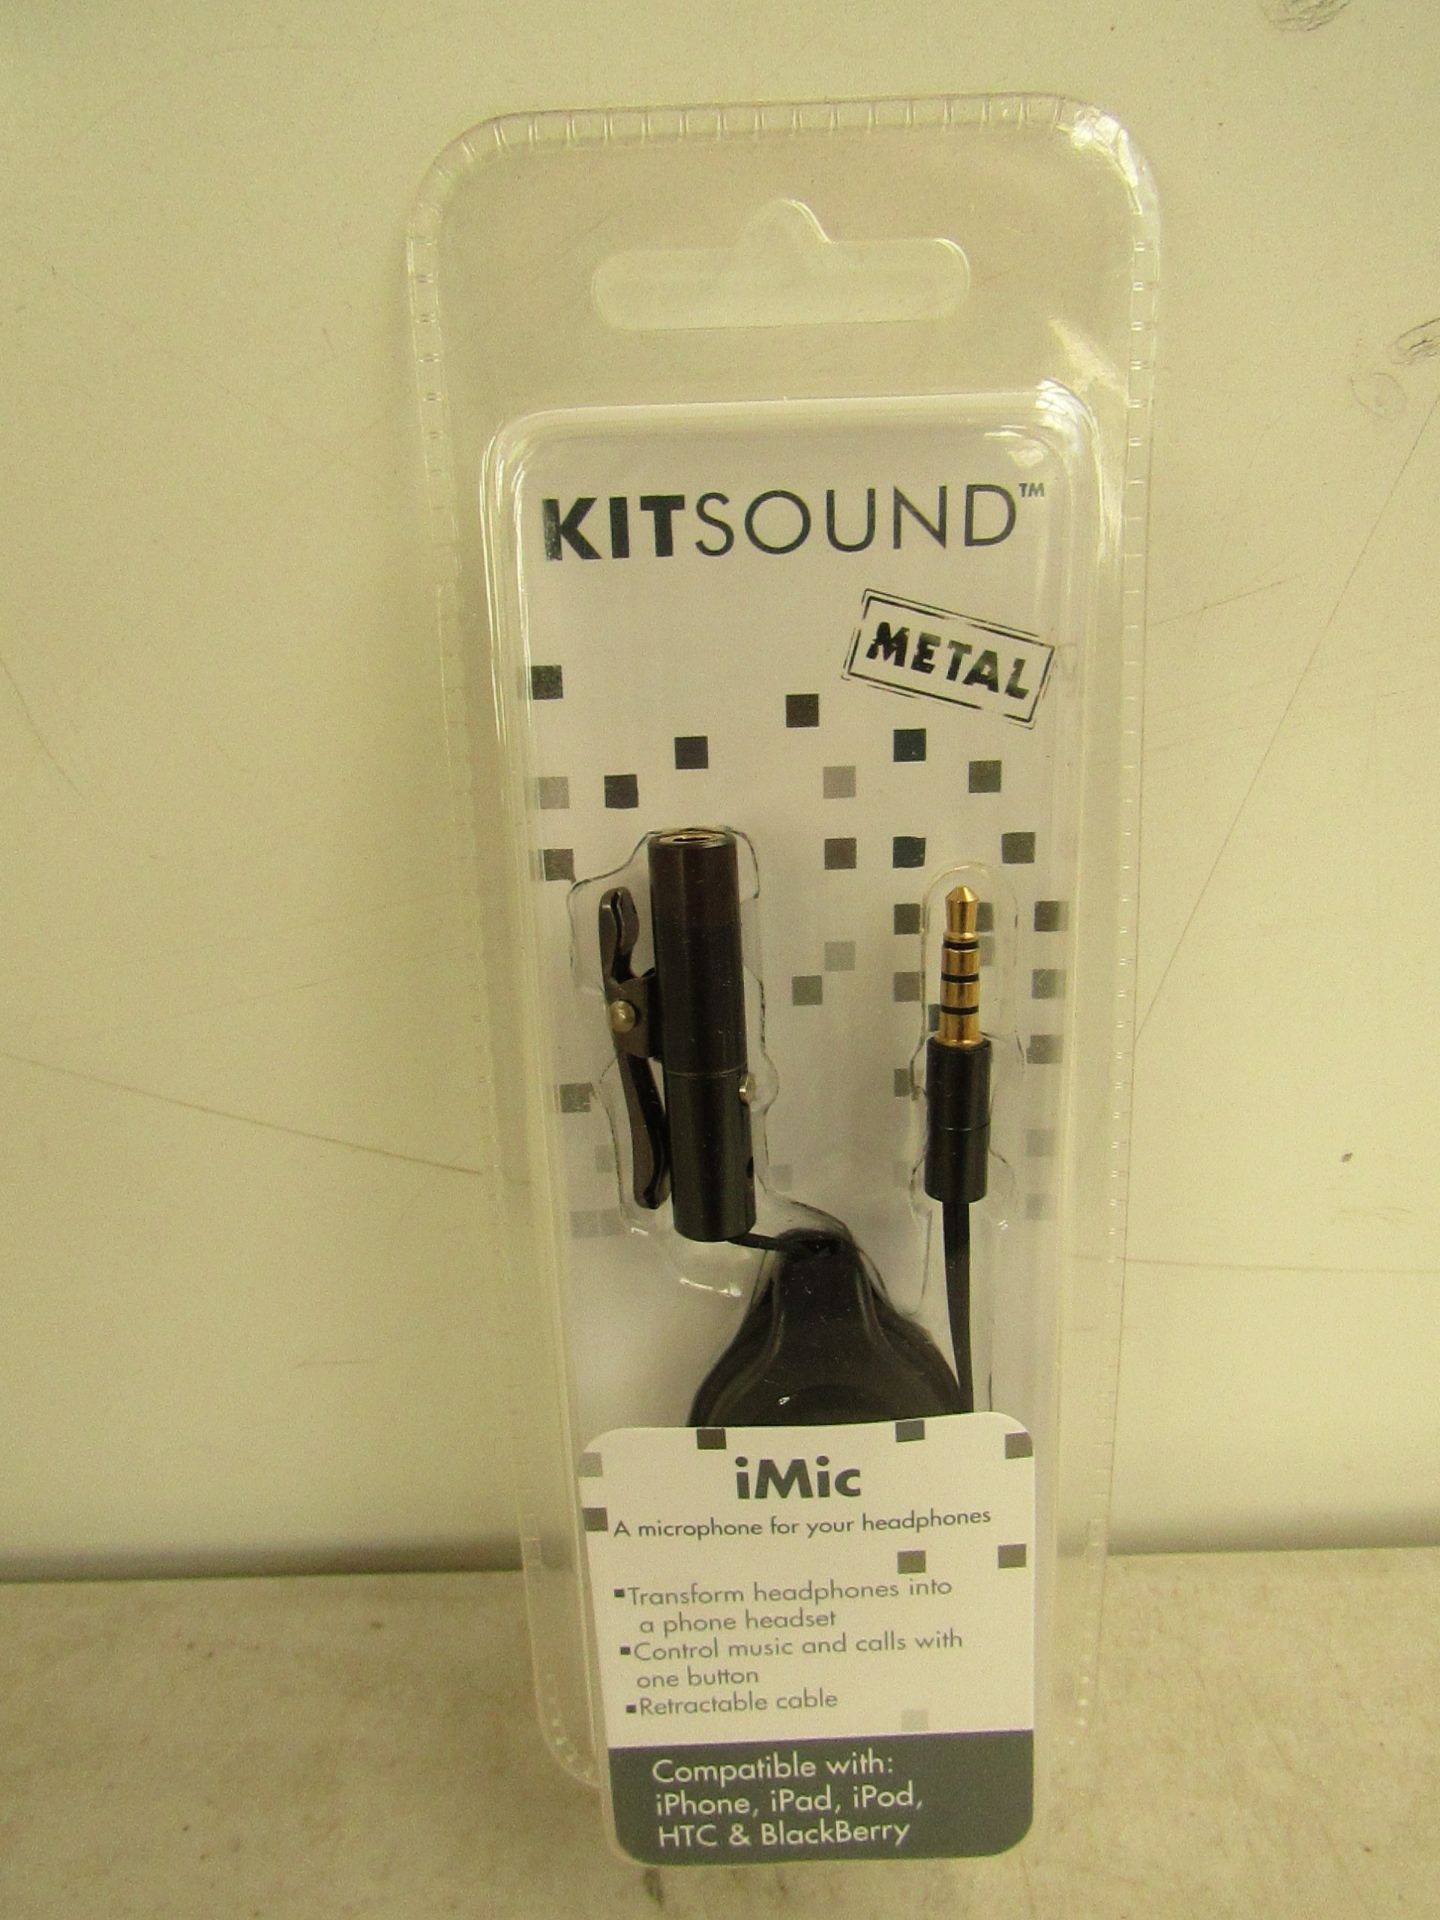 100x Kit sound microphones for your headphones, new and factory sealed in packaging.